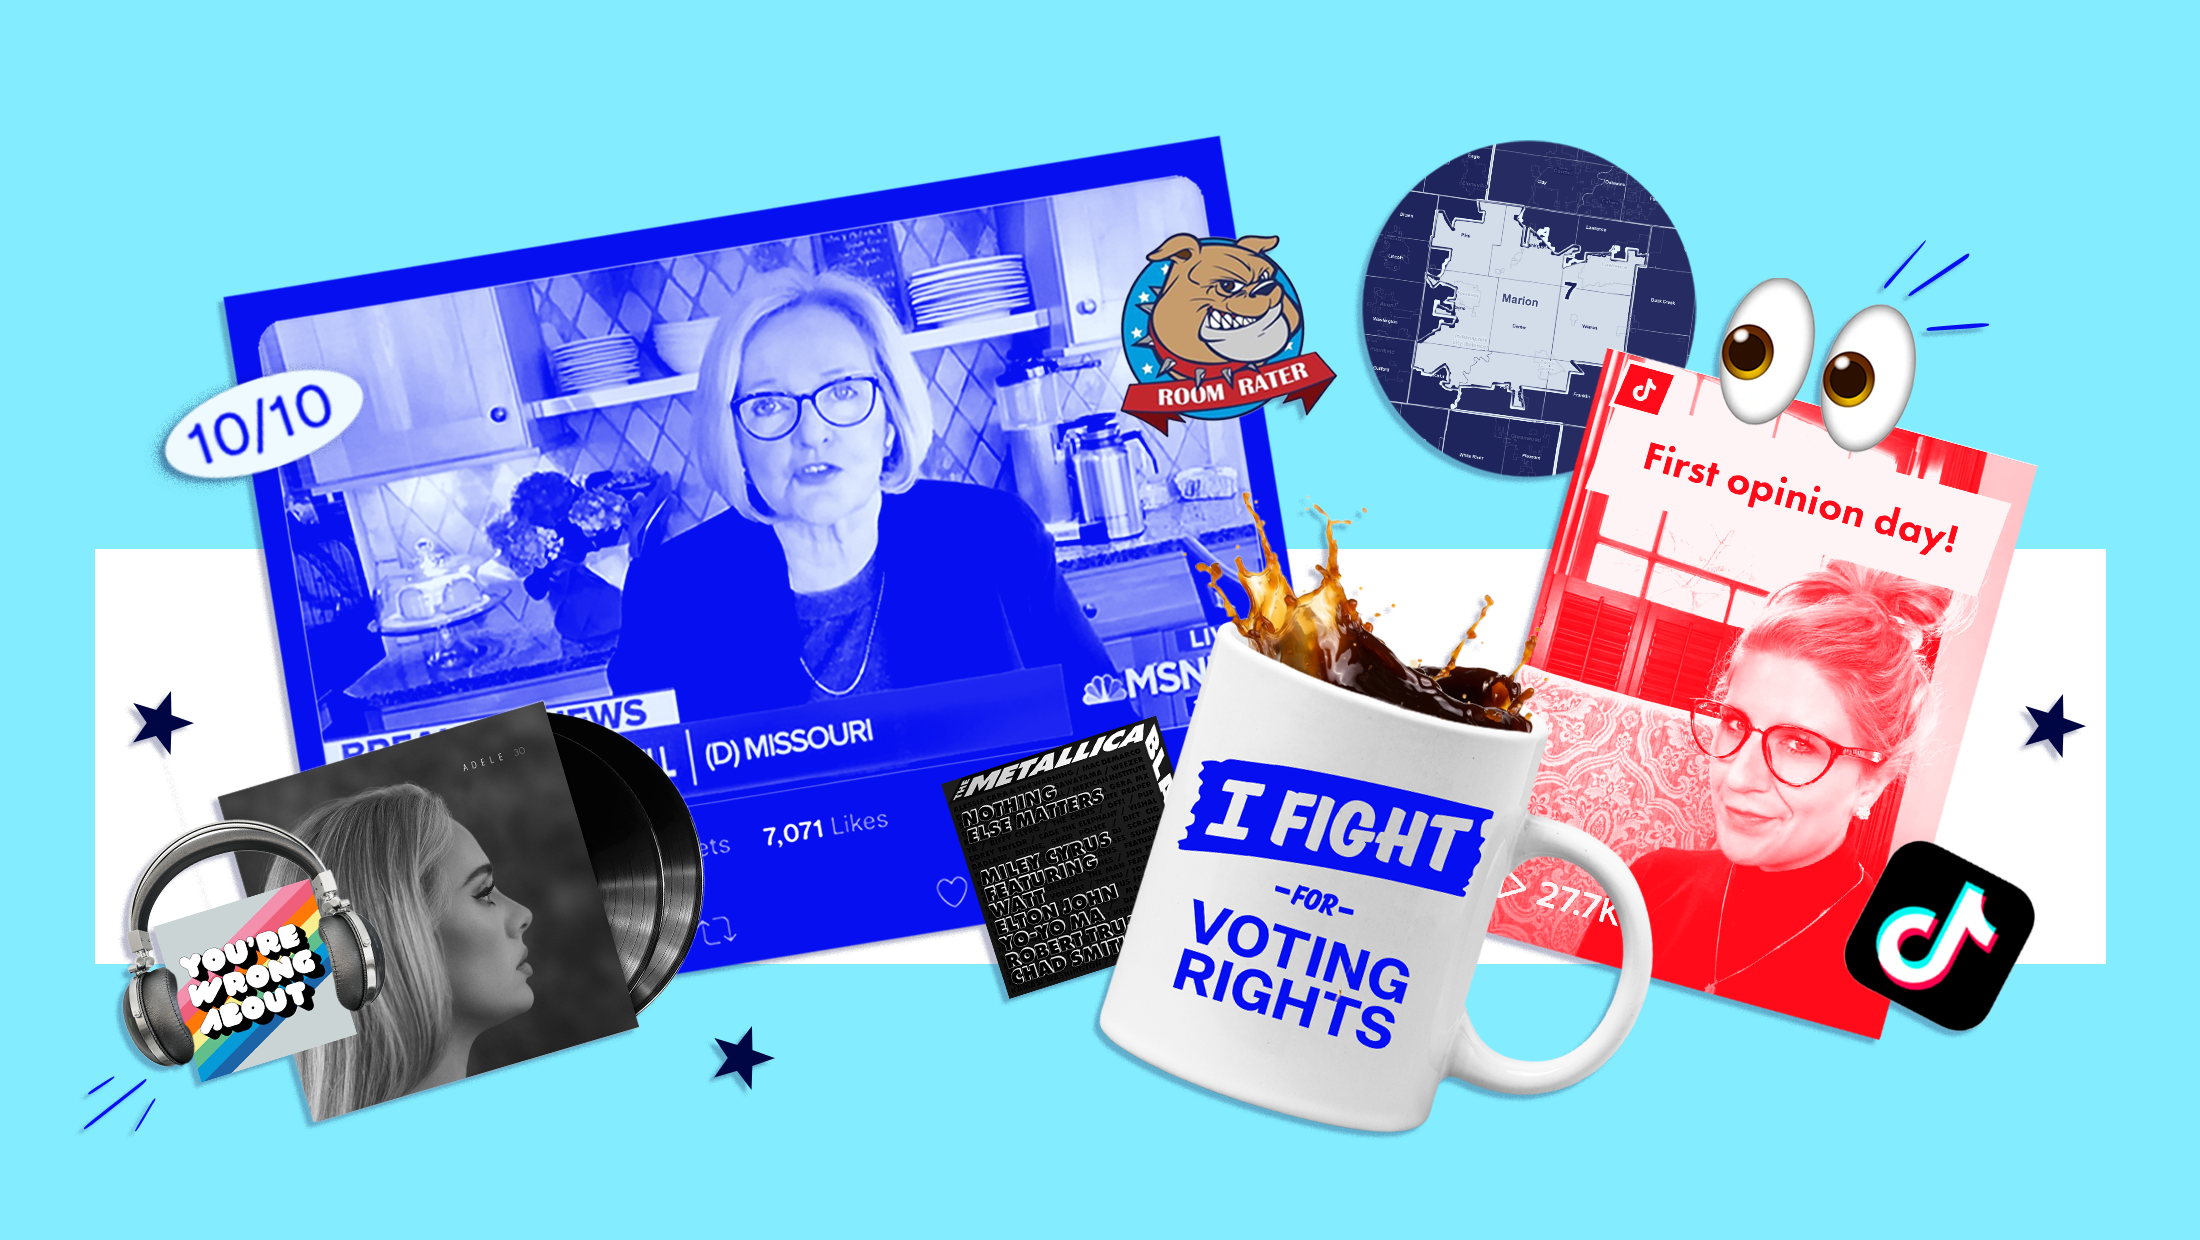 A collage featuring former U.S. Senator Claire McCaskill's MSNBC backdrop that earned her a 10/10 score from Room Raters, Adele's "30" abulm, cover art from the single "Nothing Else Matters" by Miley Cyrus, cover art for the "You're Wrong About" podcast, a map of Indiana's 7th congresional district, Democracy Docket's "I FIGHT FOR VOTING RIGHTS" mug filled with hot coffee, and a thumbail from the Tik Tok account "SCOTUS Blog"